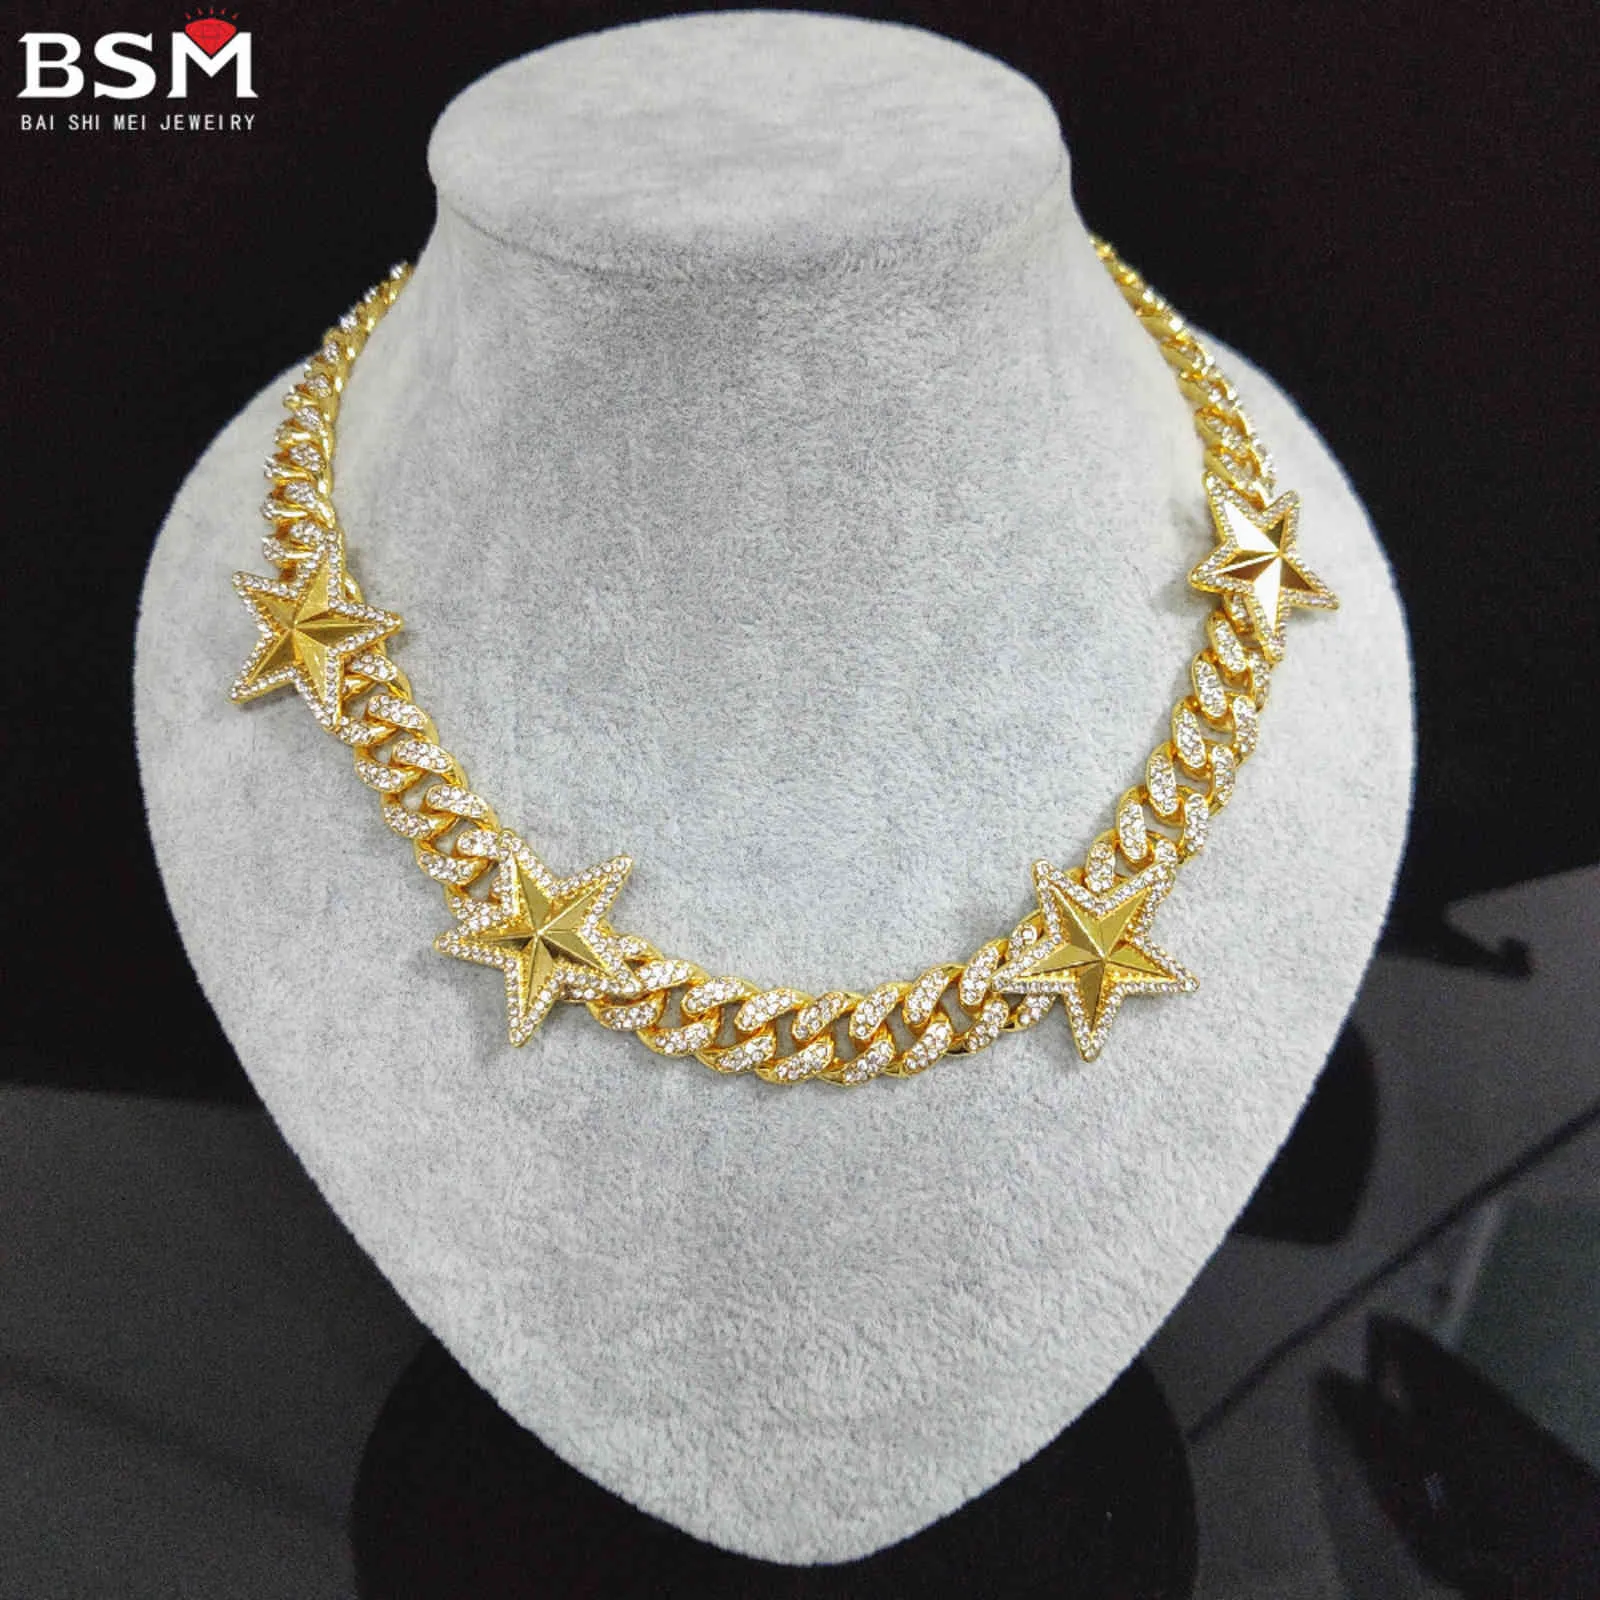 Five-pointed Star Hip Hop Bling Fashion Chain Jewelry Men And Women Same Style Clavicle Gold Silver Miami Cuban Chain Necklace Diamond Ice Crystal Necklace